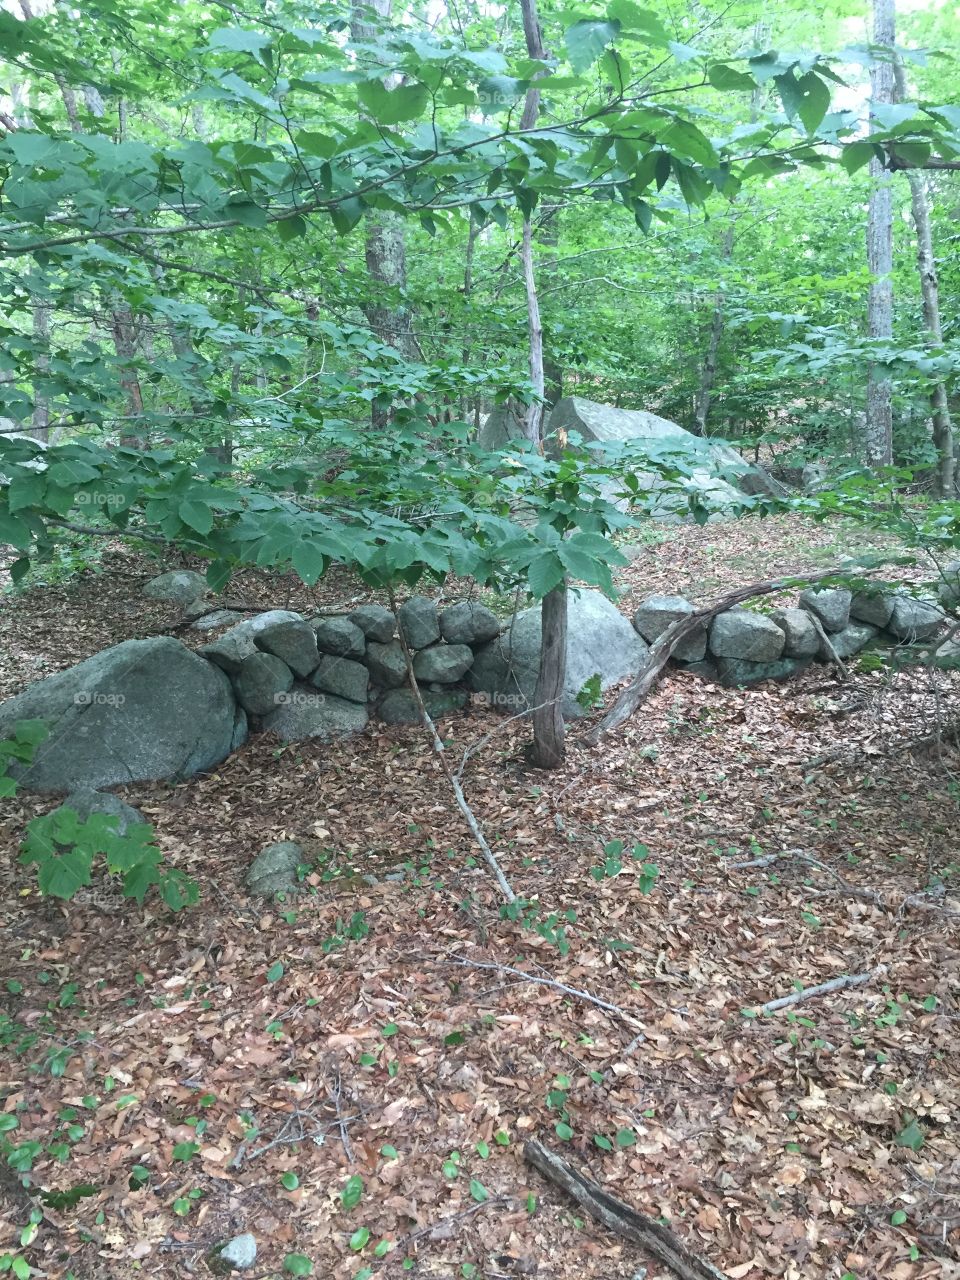 Ruins of an old stone wall in the woods of Dogtown, Massachusetts, near Gloucester. The summertime forest is green.